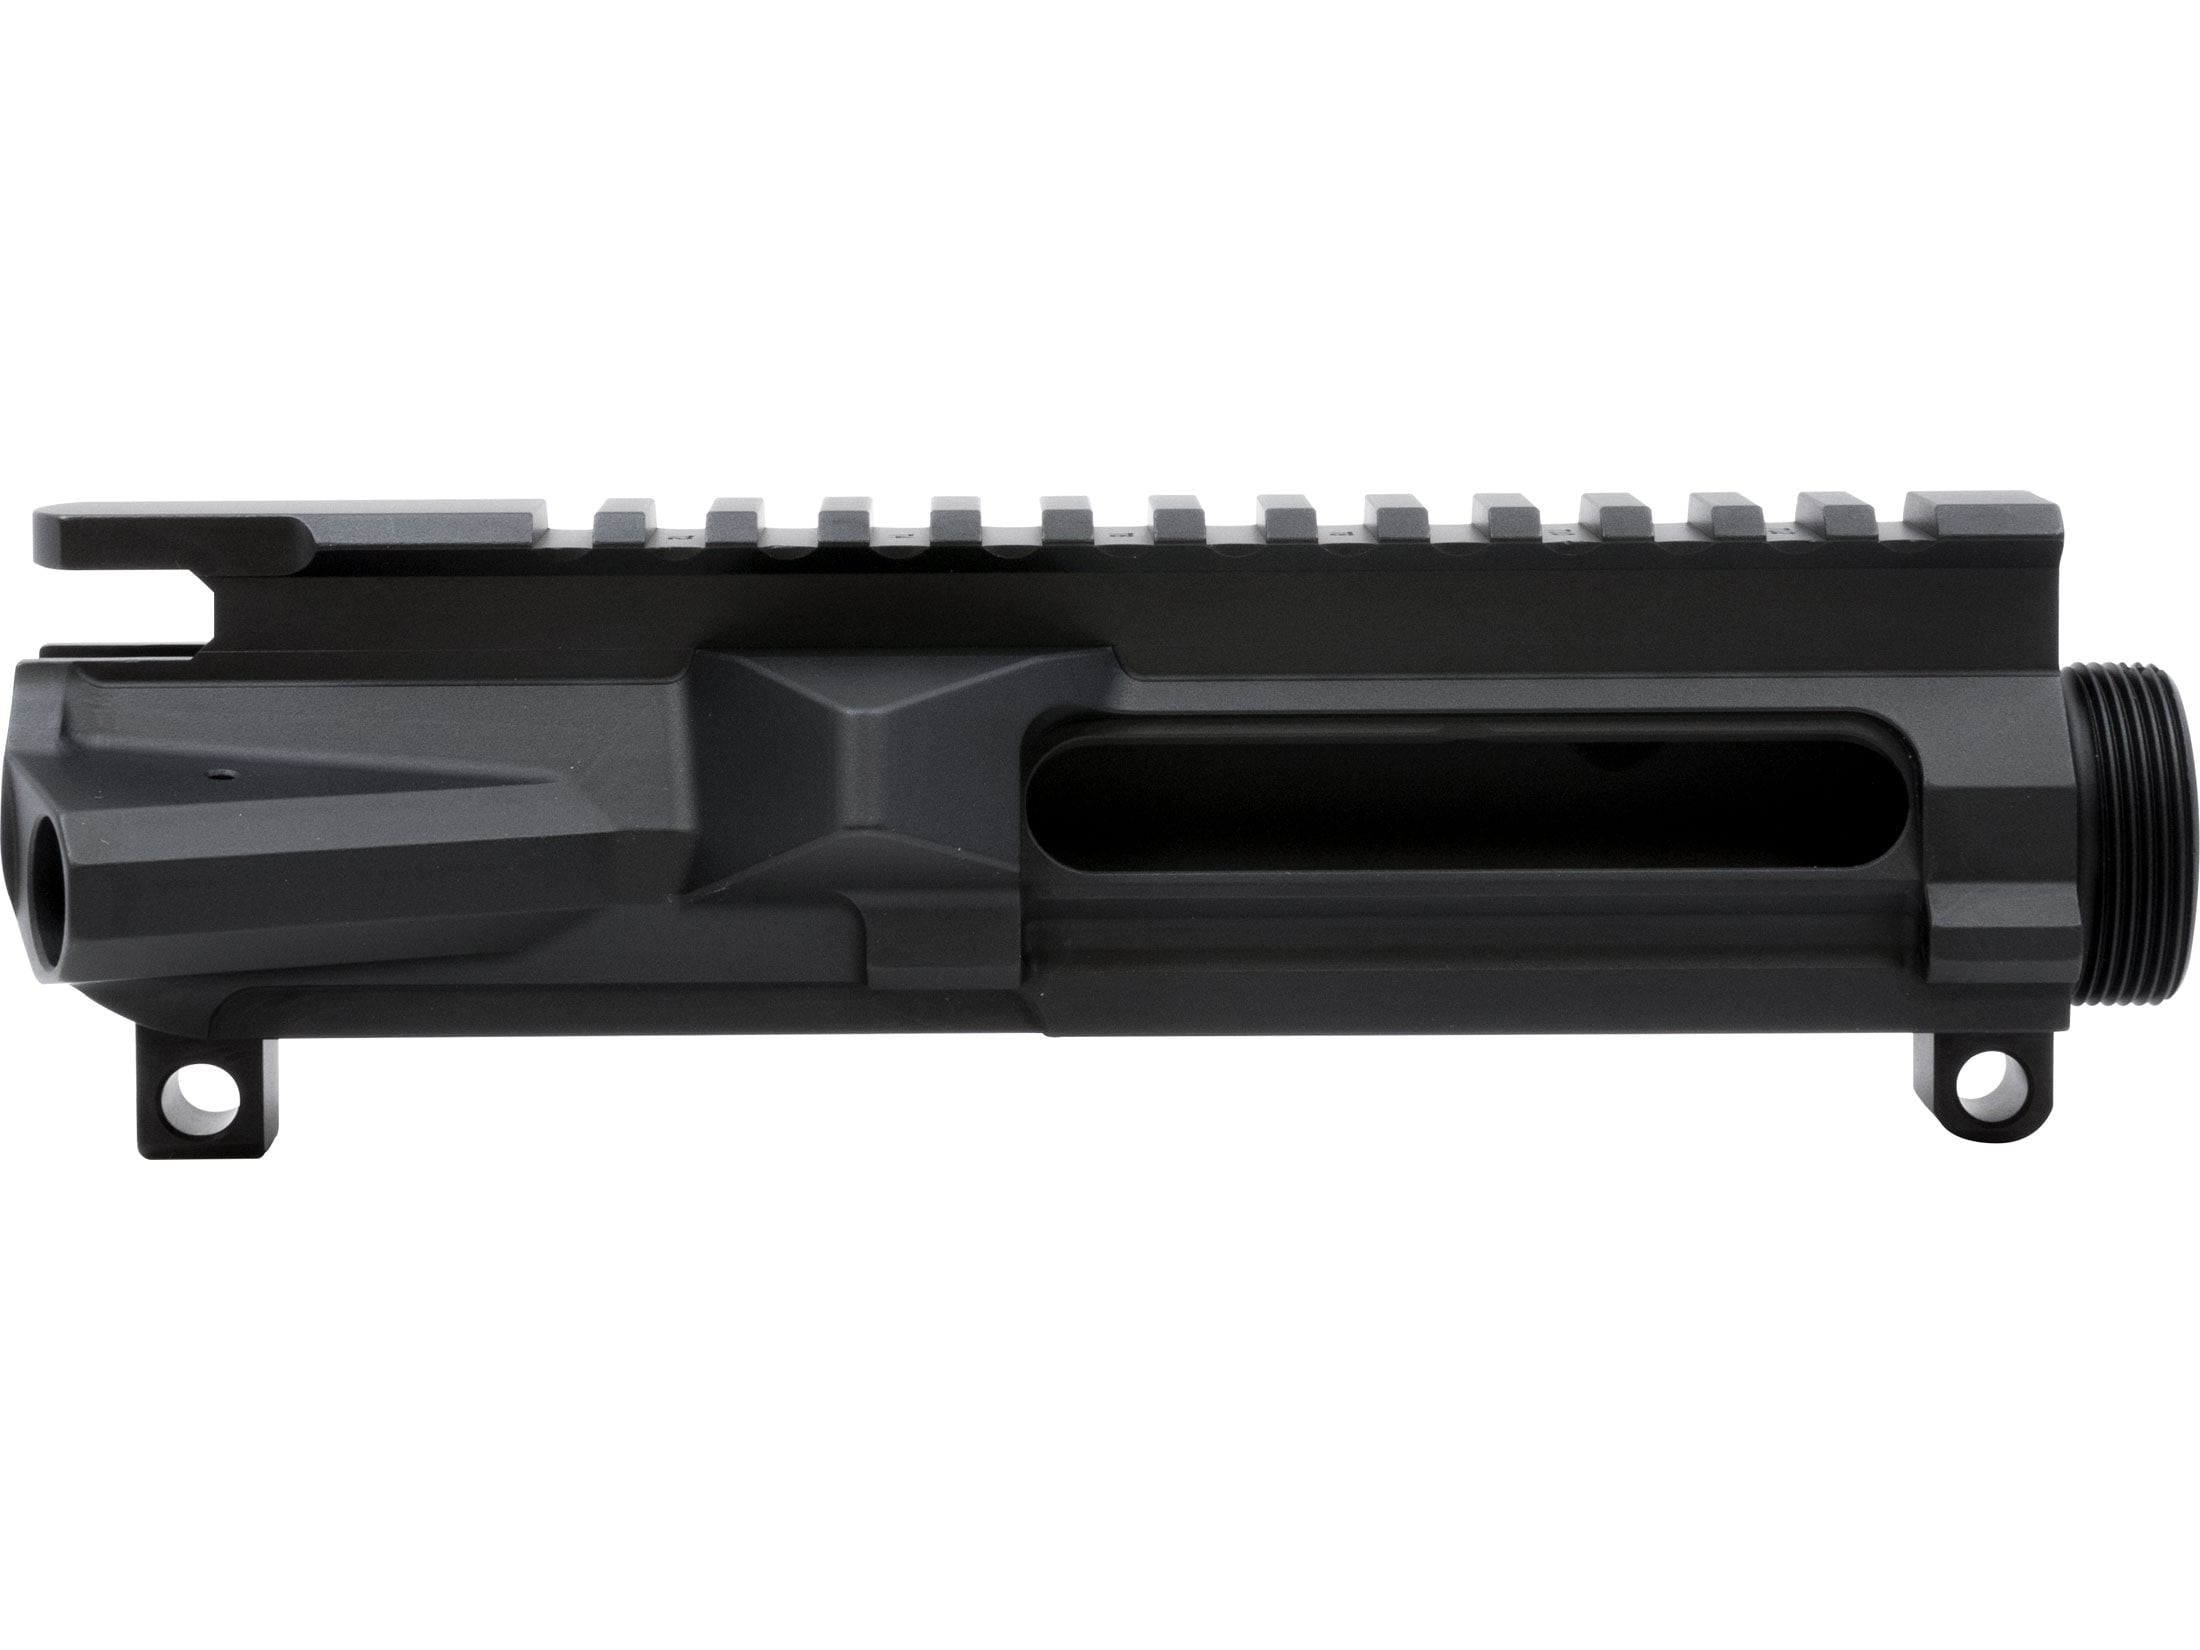 The AR-STONER ™ Stripped AR-15 Billet Upper Receiver is a great choice for ...